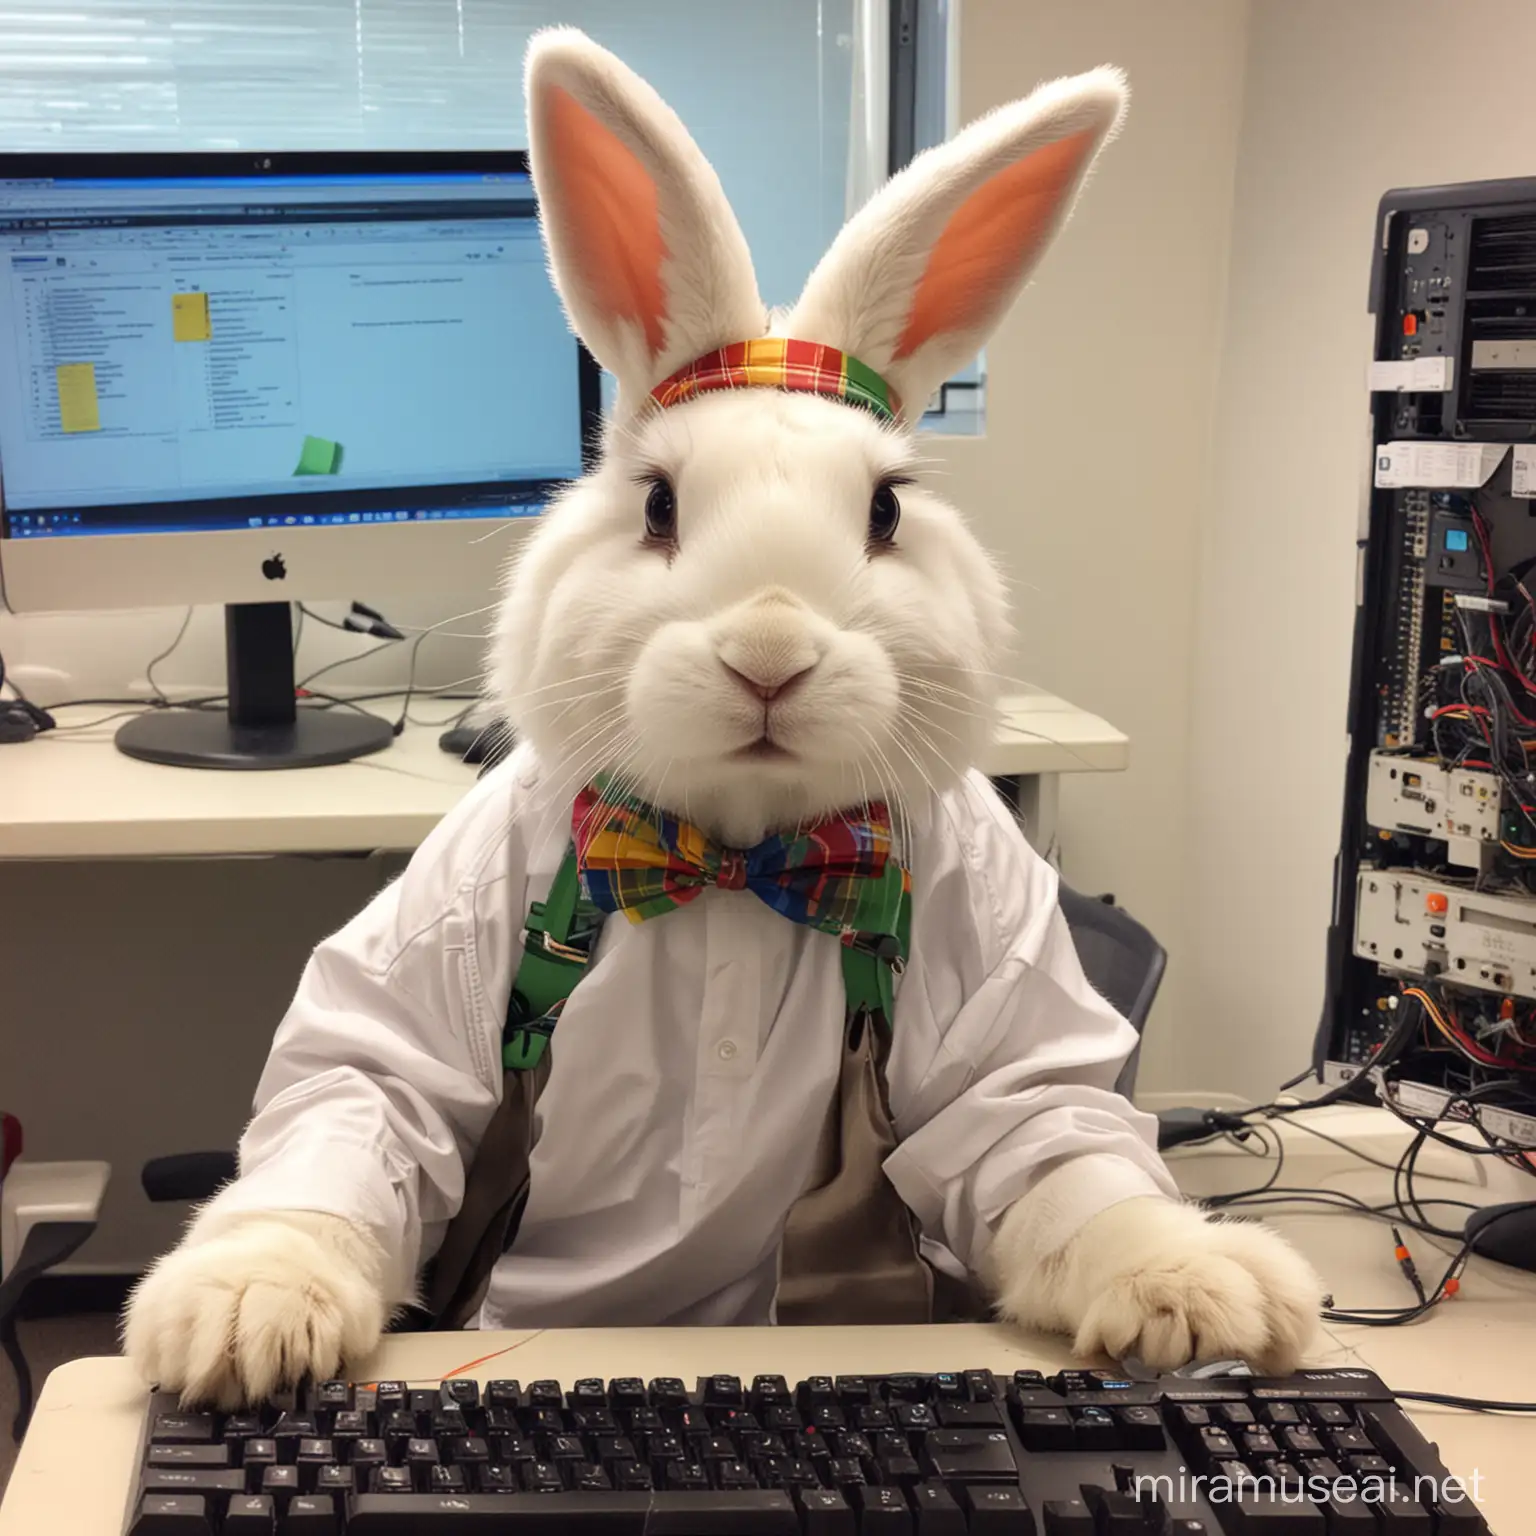 Easter Bunny who works as an IT technician during the week
